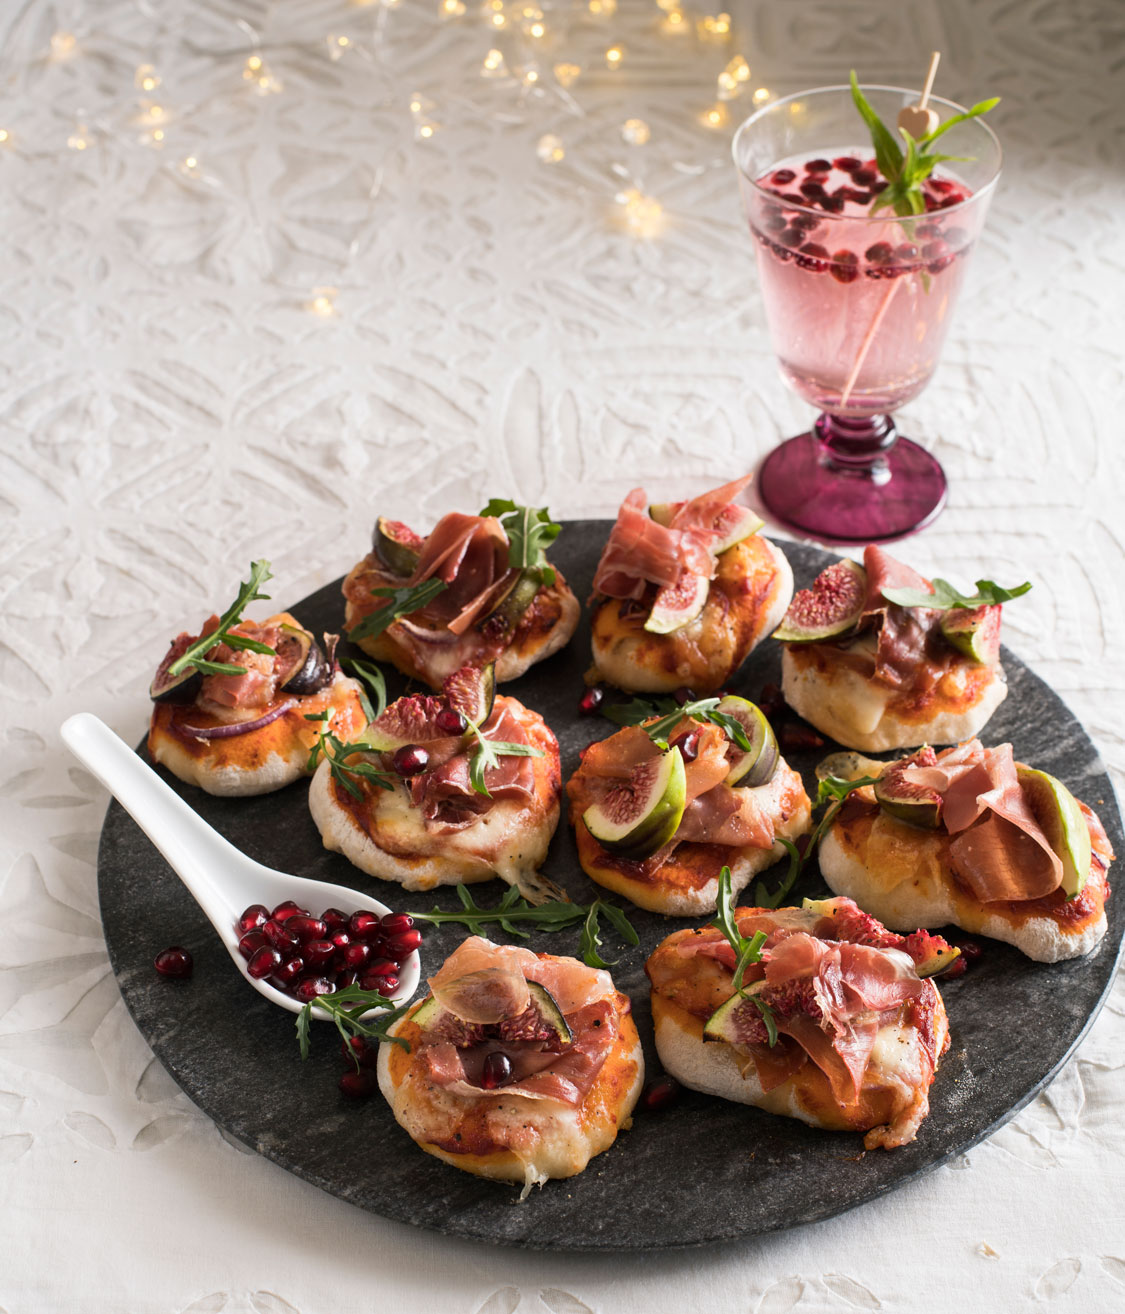 FESTIVE PARTY SNACK: A COCKTAIL AND BITE-SIZED PIZZAS | SA Garden and Home